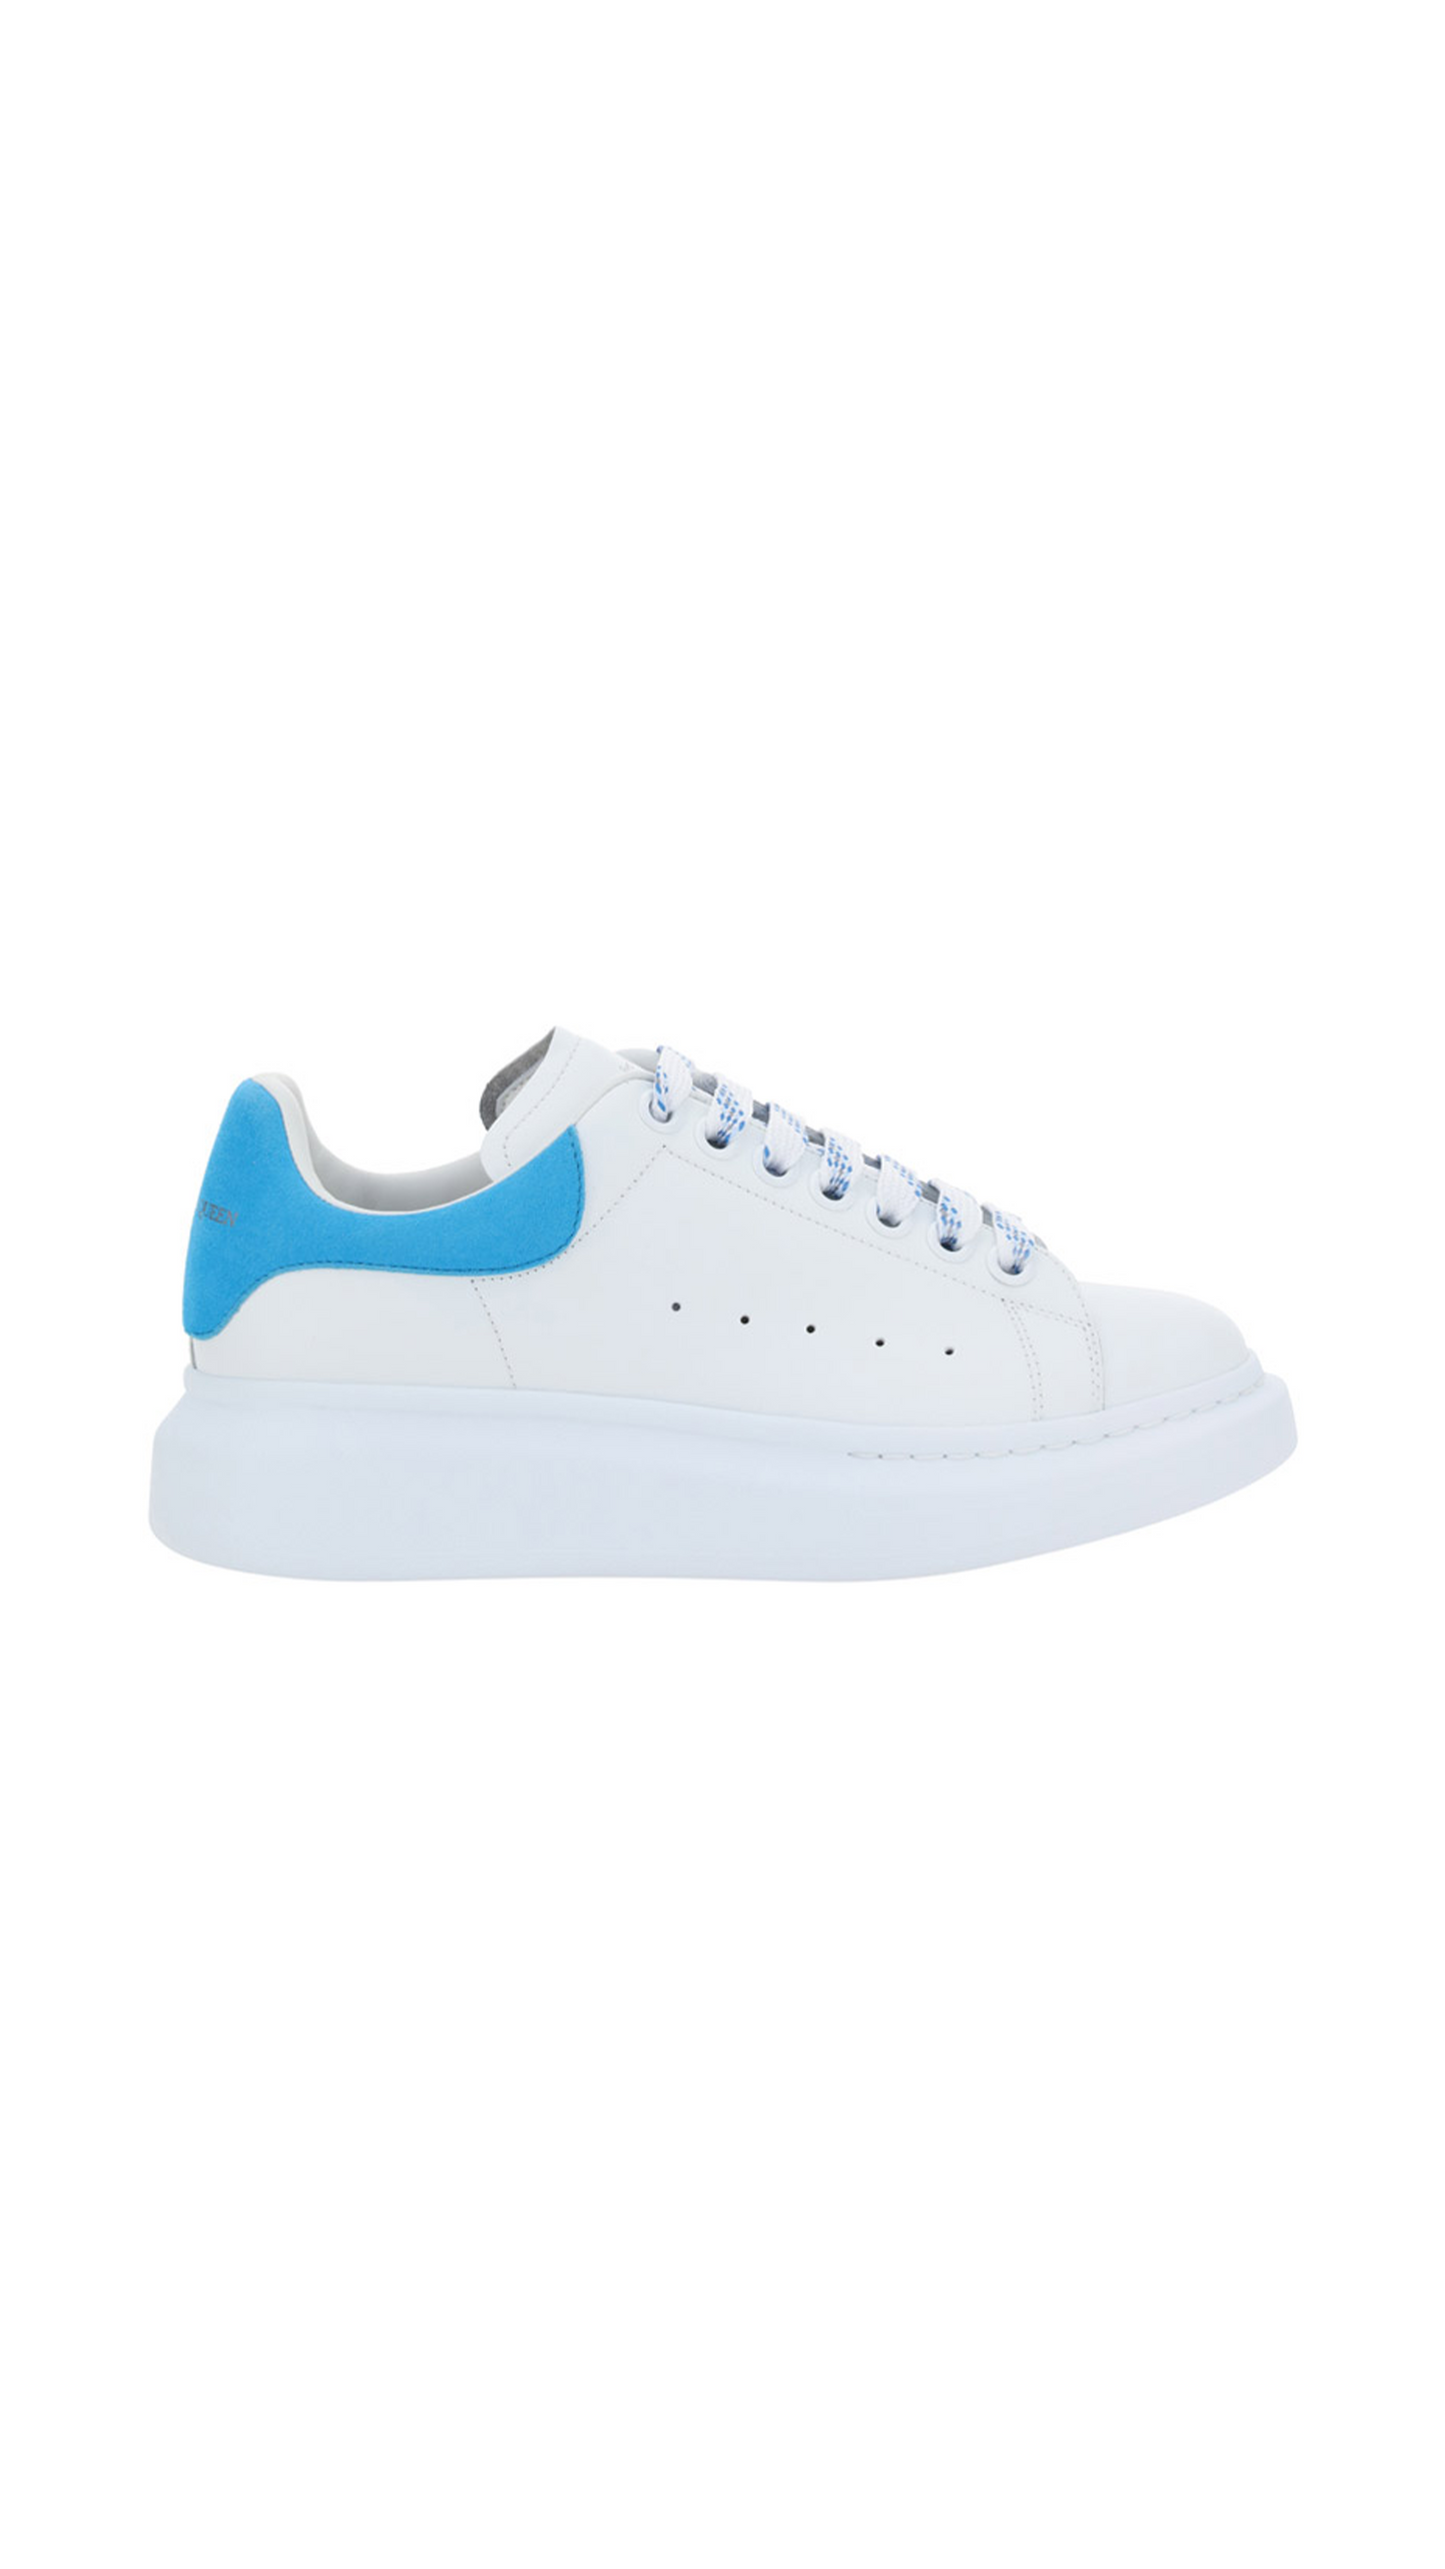 Oversized Sneakers - Blue / White